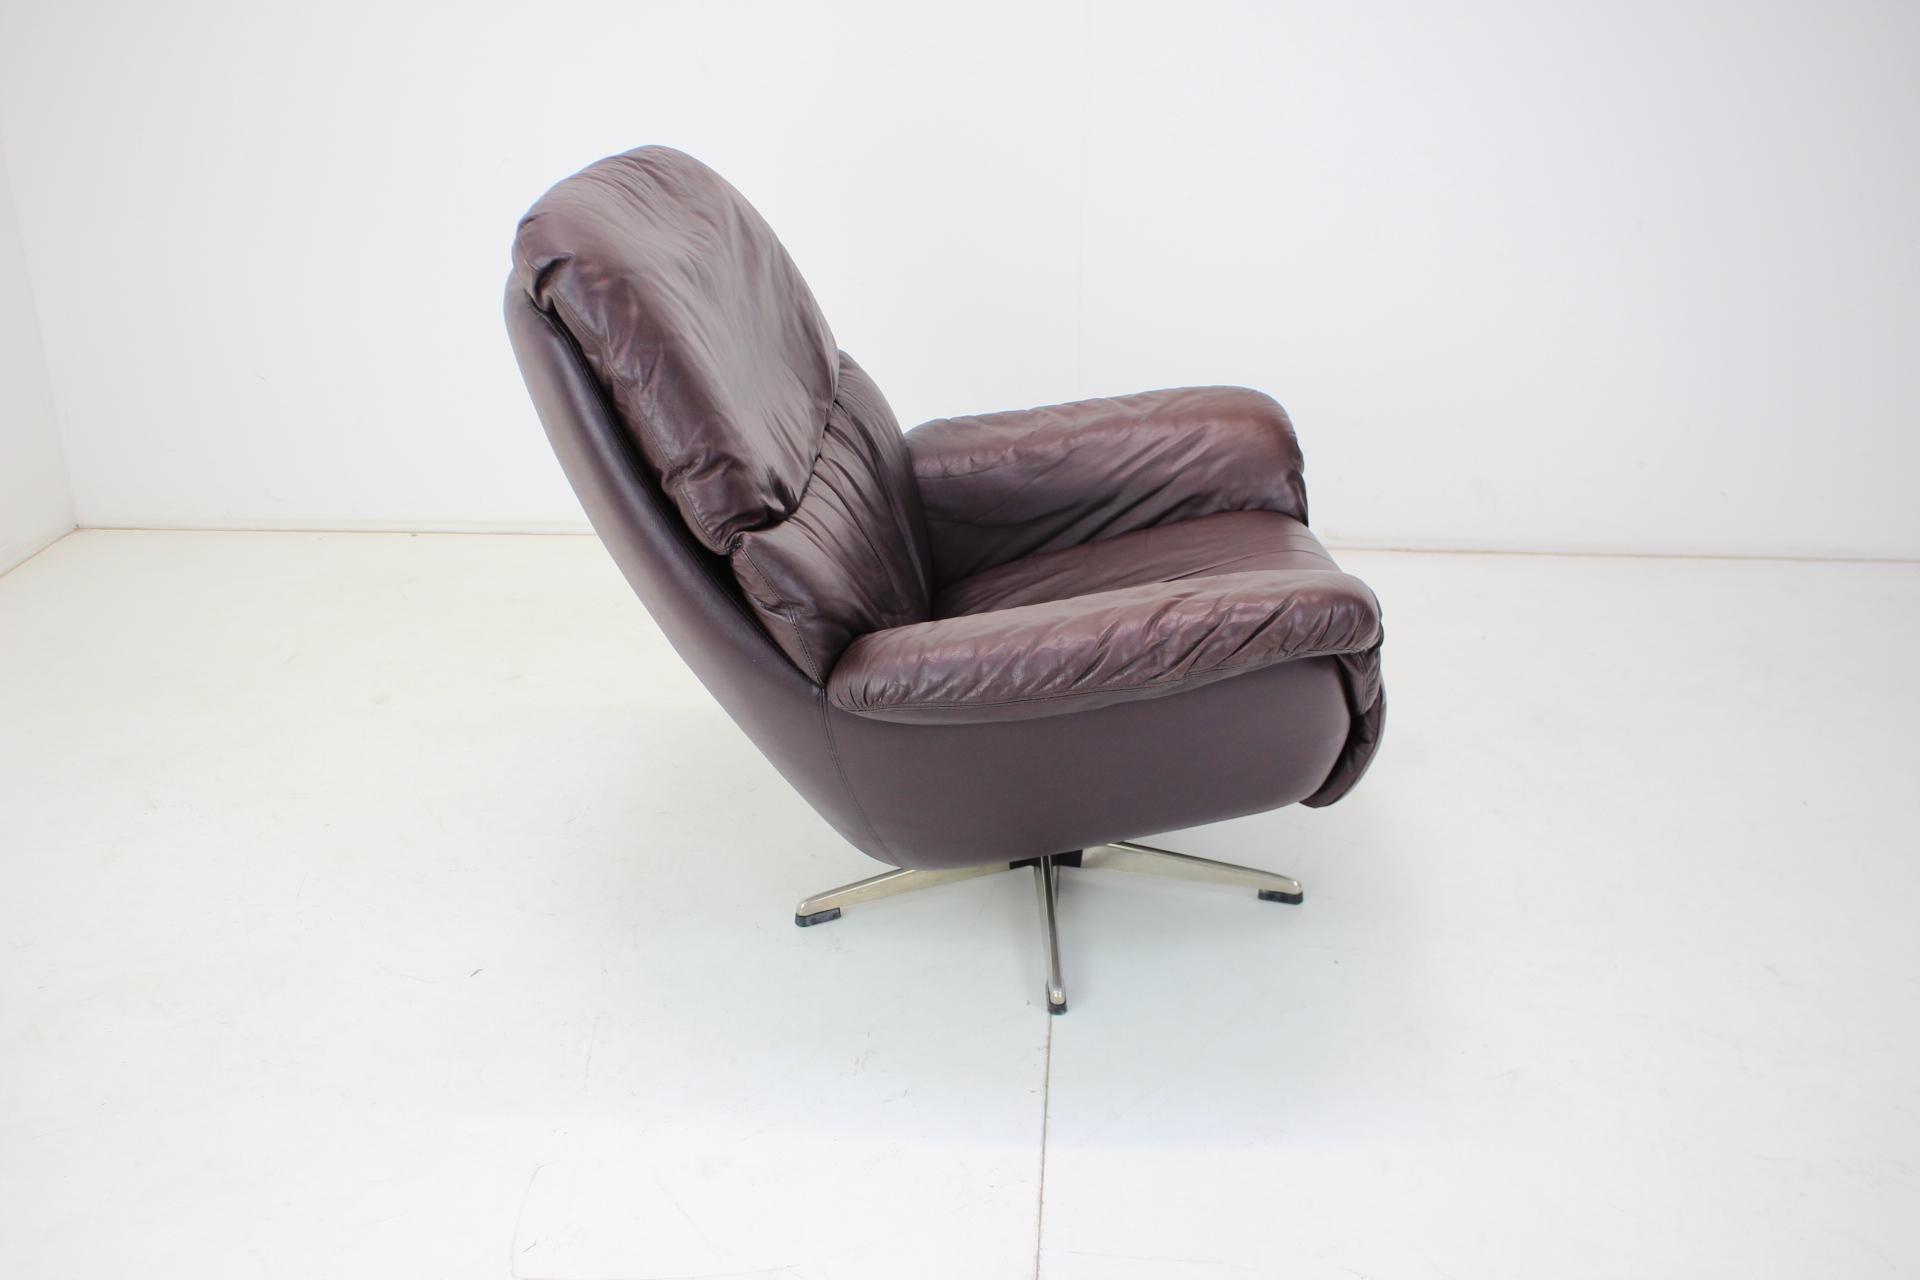 Late 20th Century Large Scandinavian Adjustable Leather Armchair by Peem, 1970s, Finland For Sale